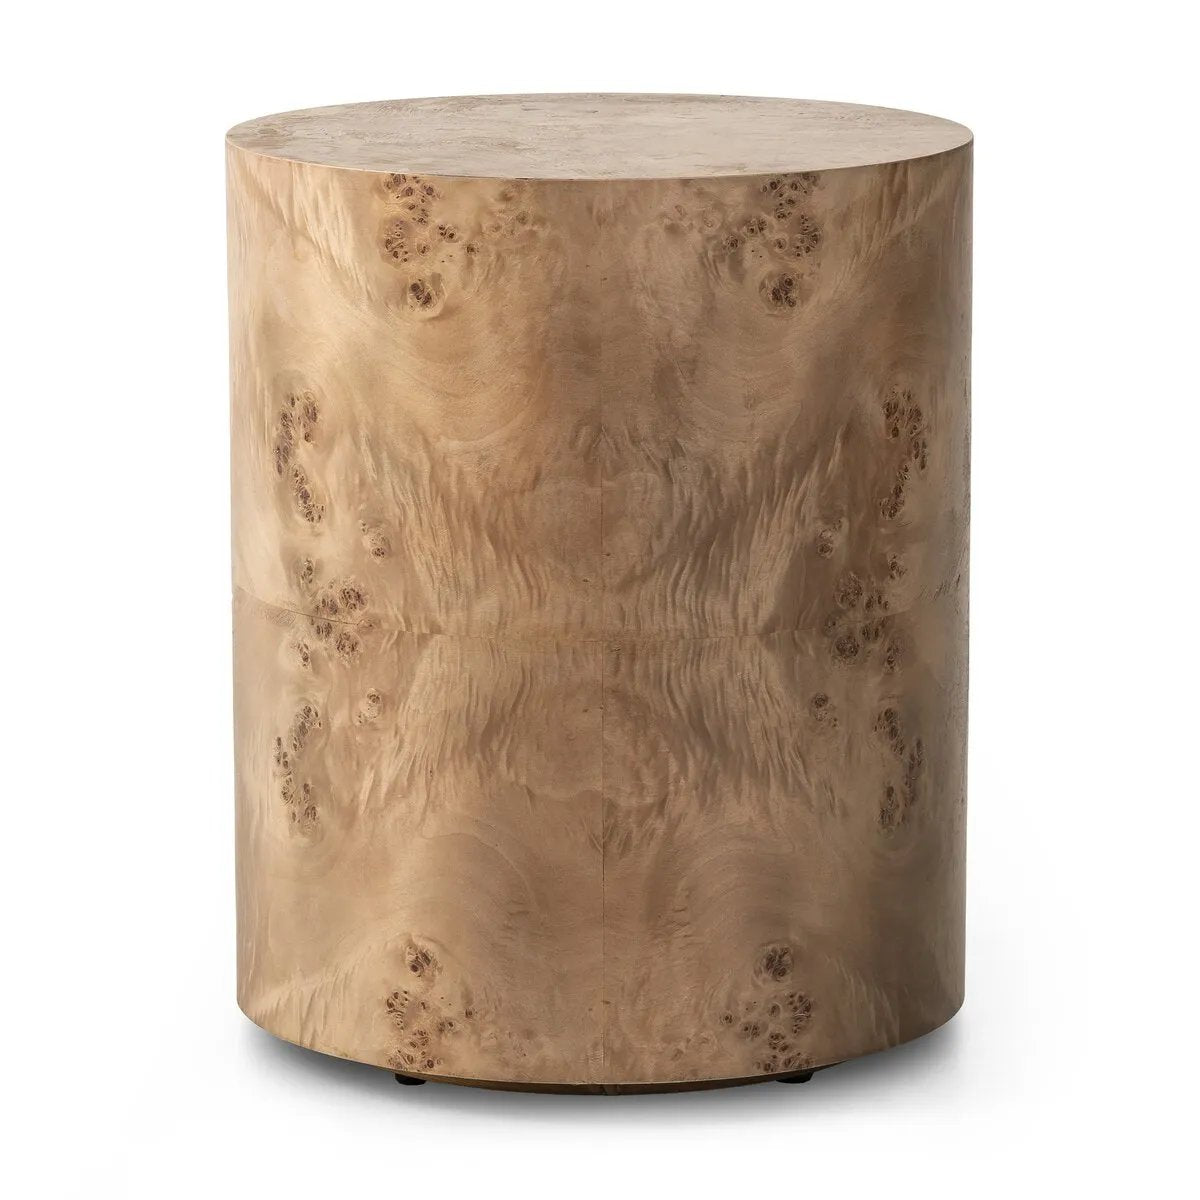 A simple drum shape showcases the natural artistry of the richly grained caramel burl veneer. Its compact size is ideal for smaller spaces.Collection: Hughe Amethyst Home provides interior design, new home construction design consulting, vintage area rugs, and lighting in the Calabasas metro area.